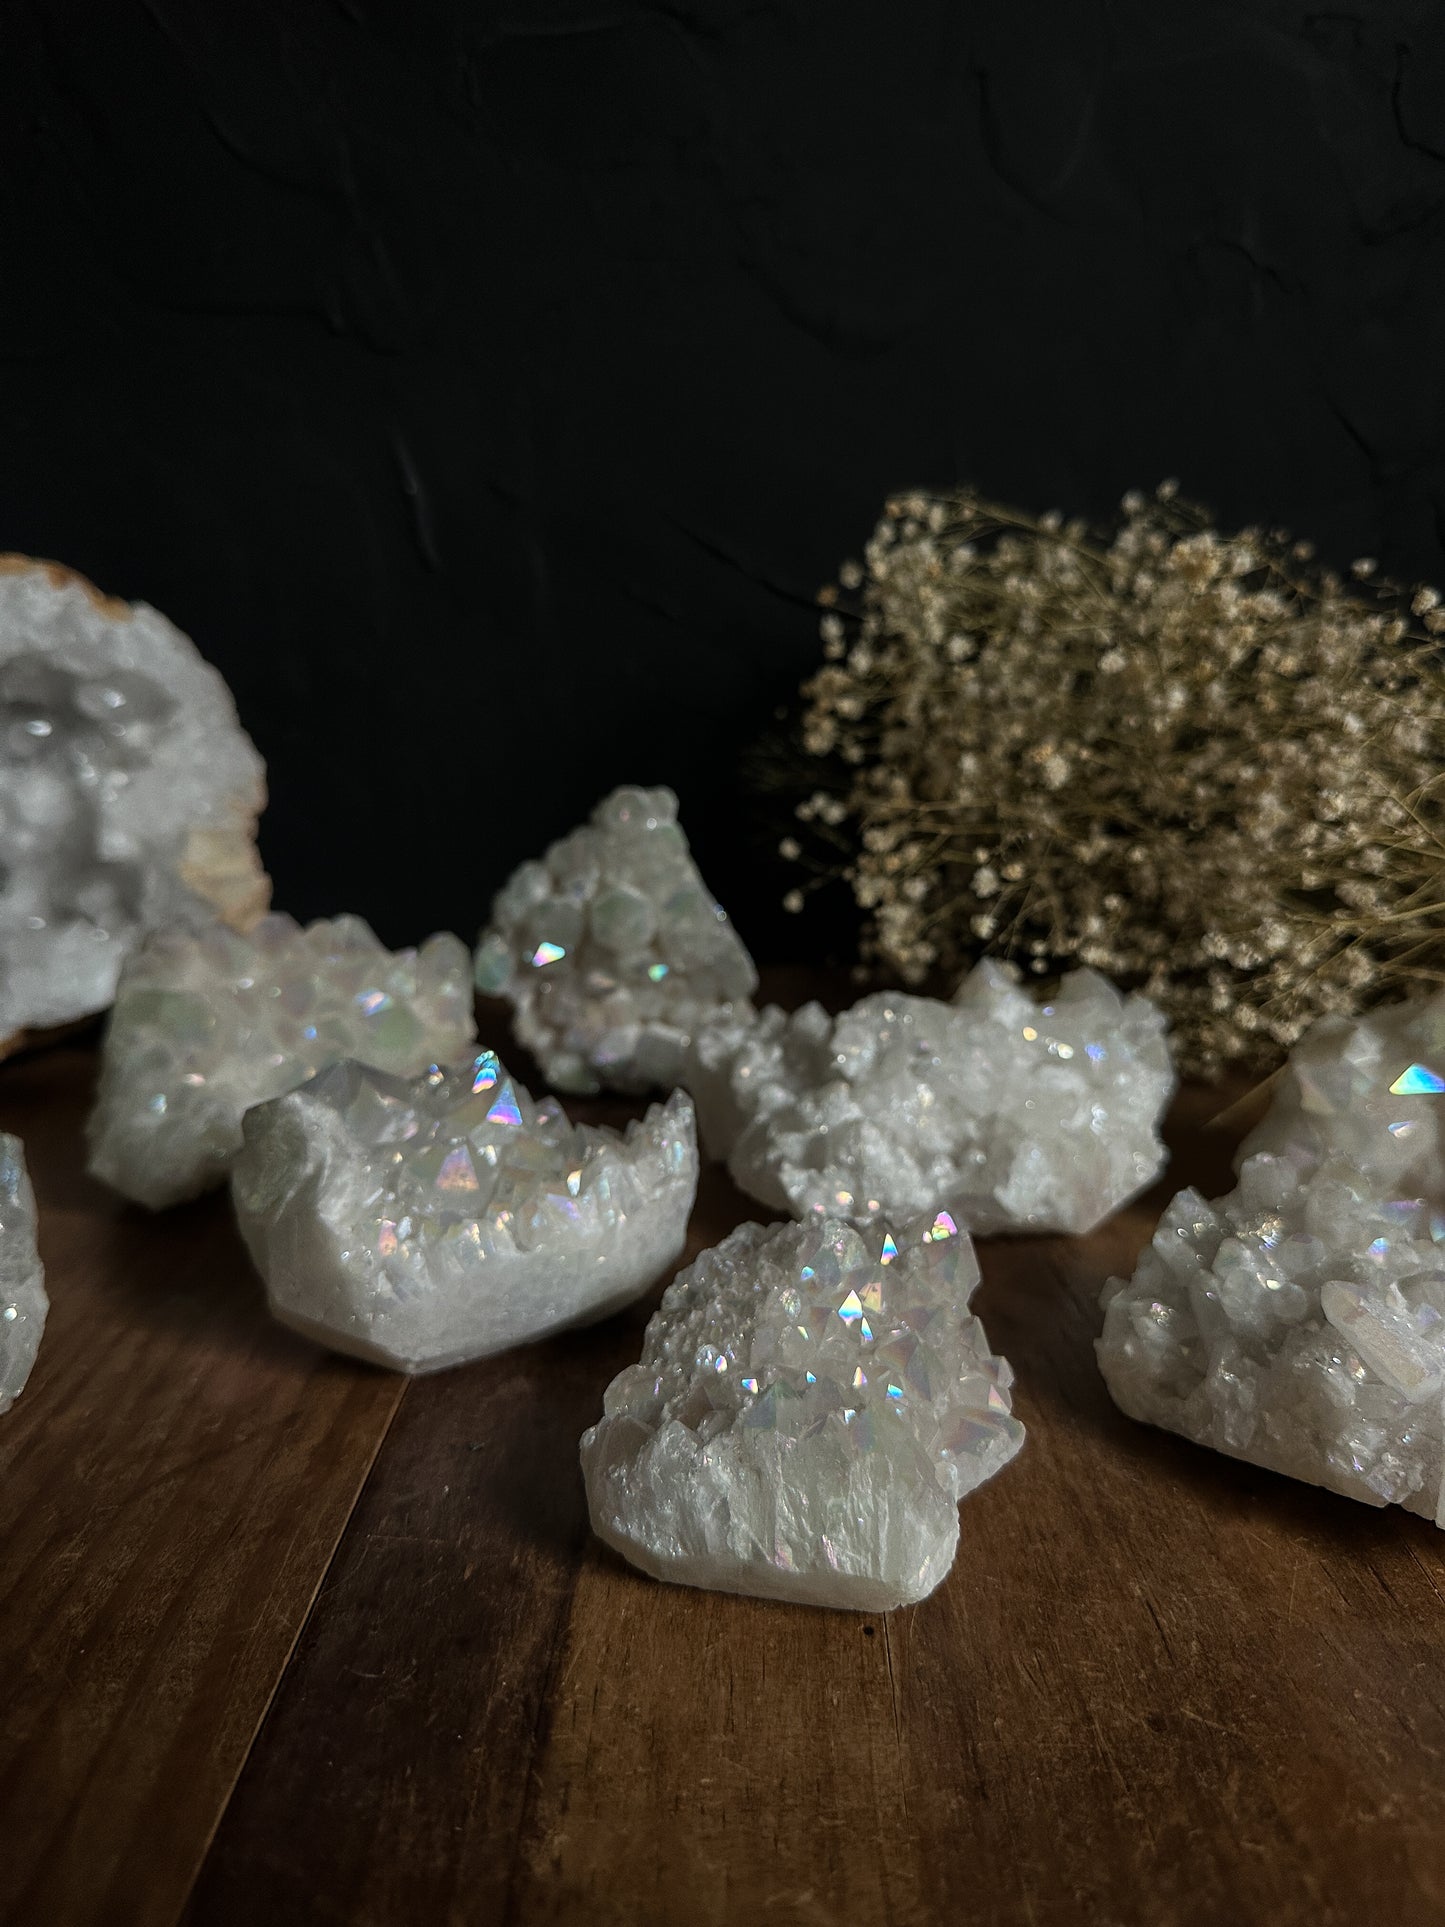 Radiant Angel Aura Quartz Clusters shimmer with a heavenly glow, reflecting soft pinks, blues, and purples. These mesmerizing specimens bring a touch of magic to any environment, making them a perfect statement piece for home decor or a heartfelt present for someone special